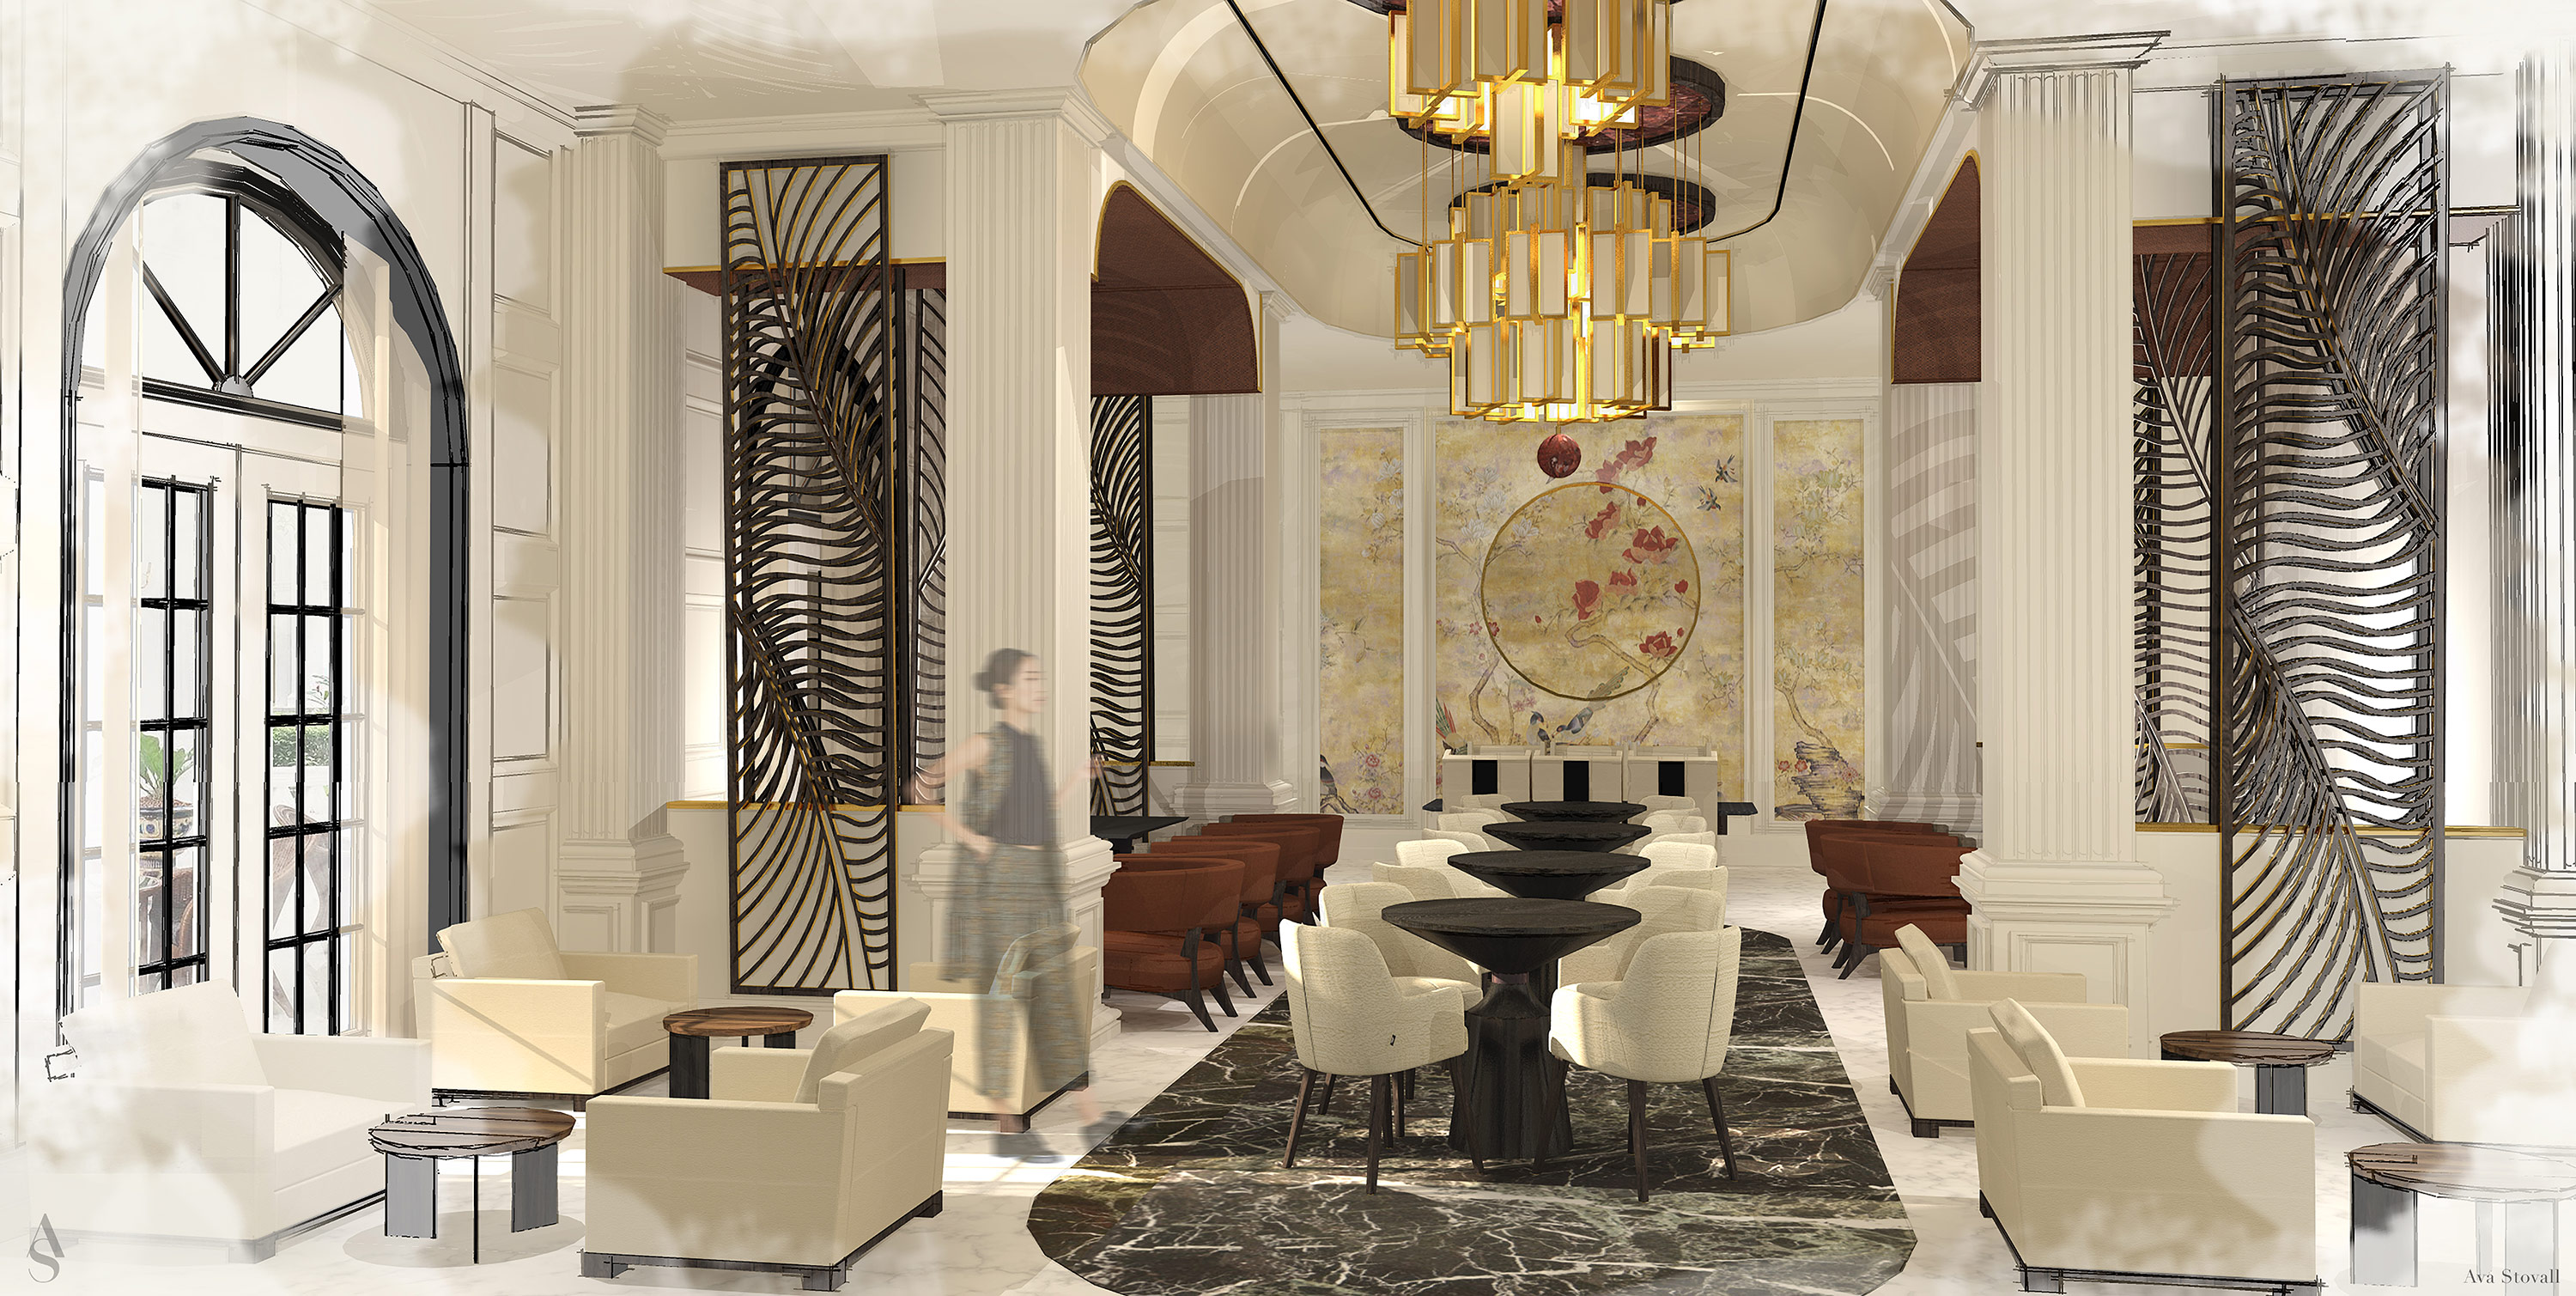 Digital rendering of redesign of lobby of the historic Raffles Hotel in Singapore.